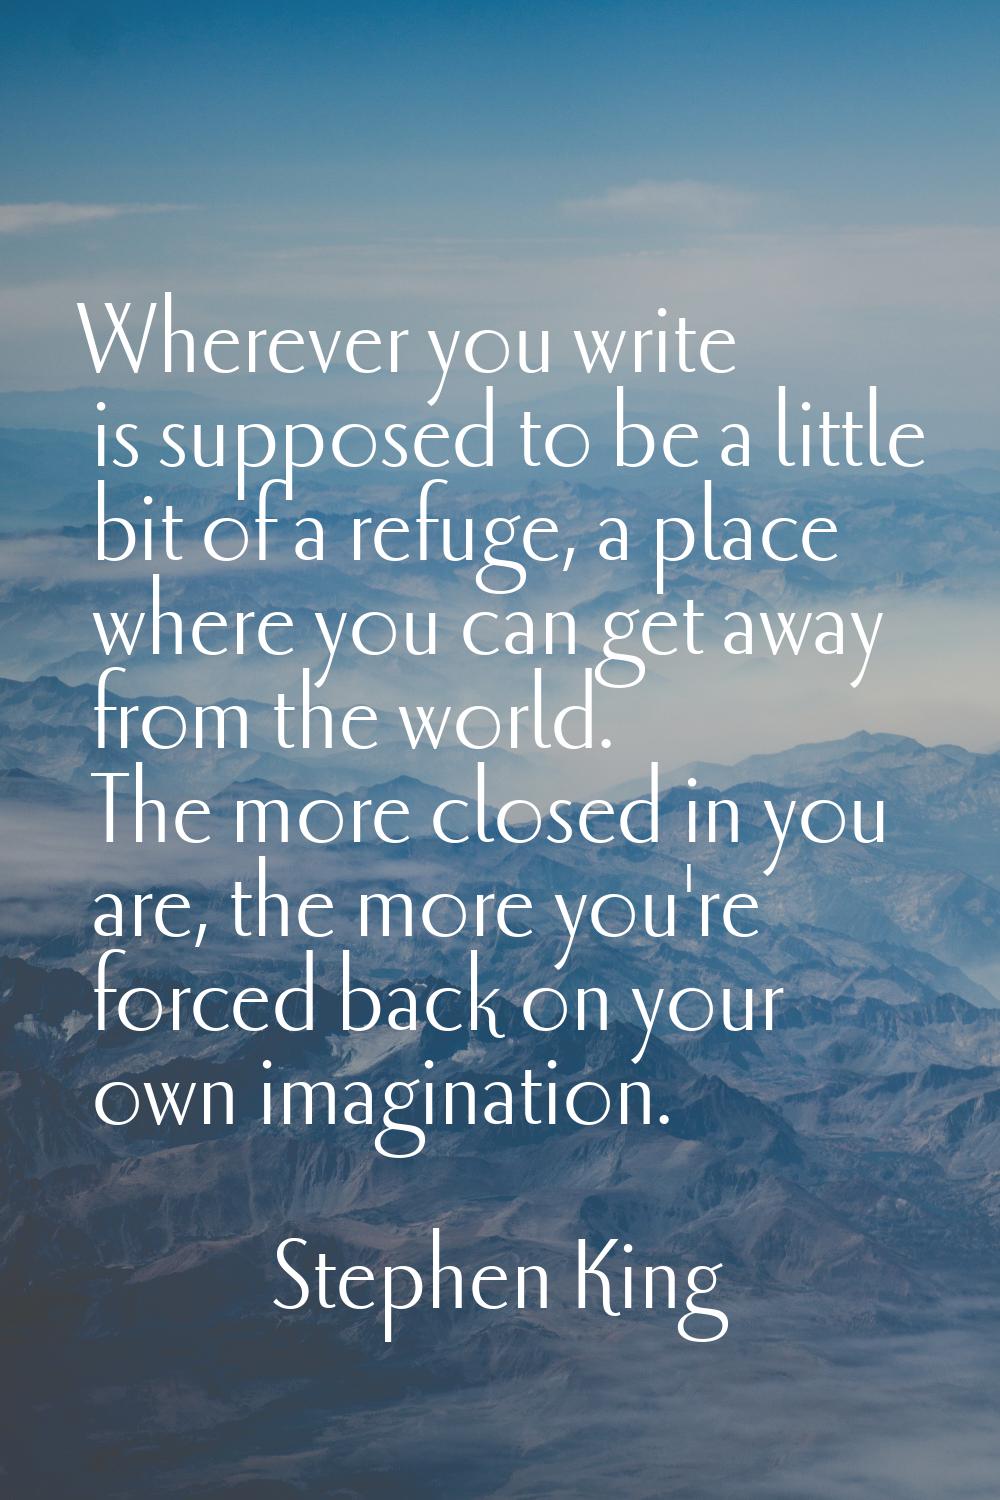 Wherever you write is supposed to be a little bit of a refuge, a place where you can get away from 